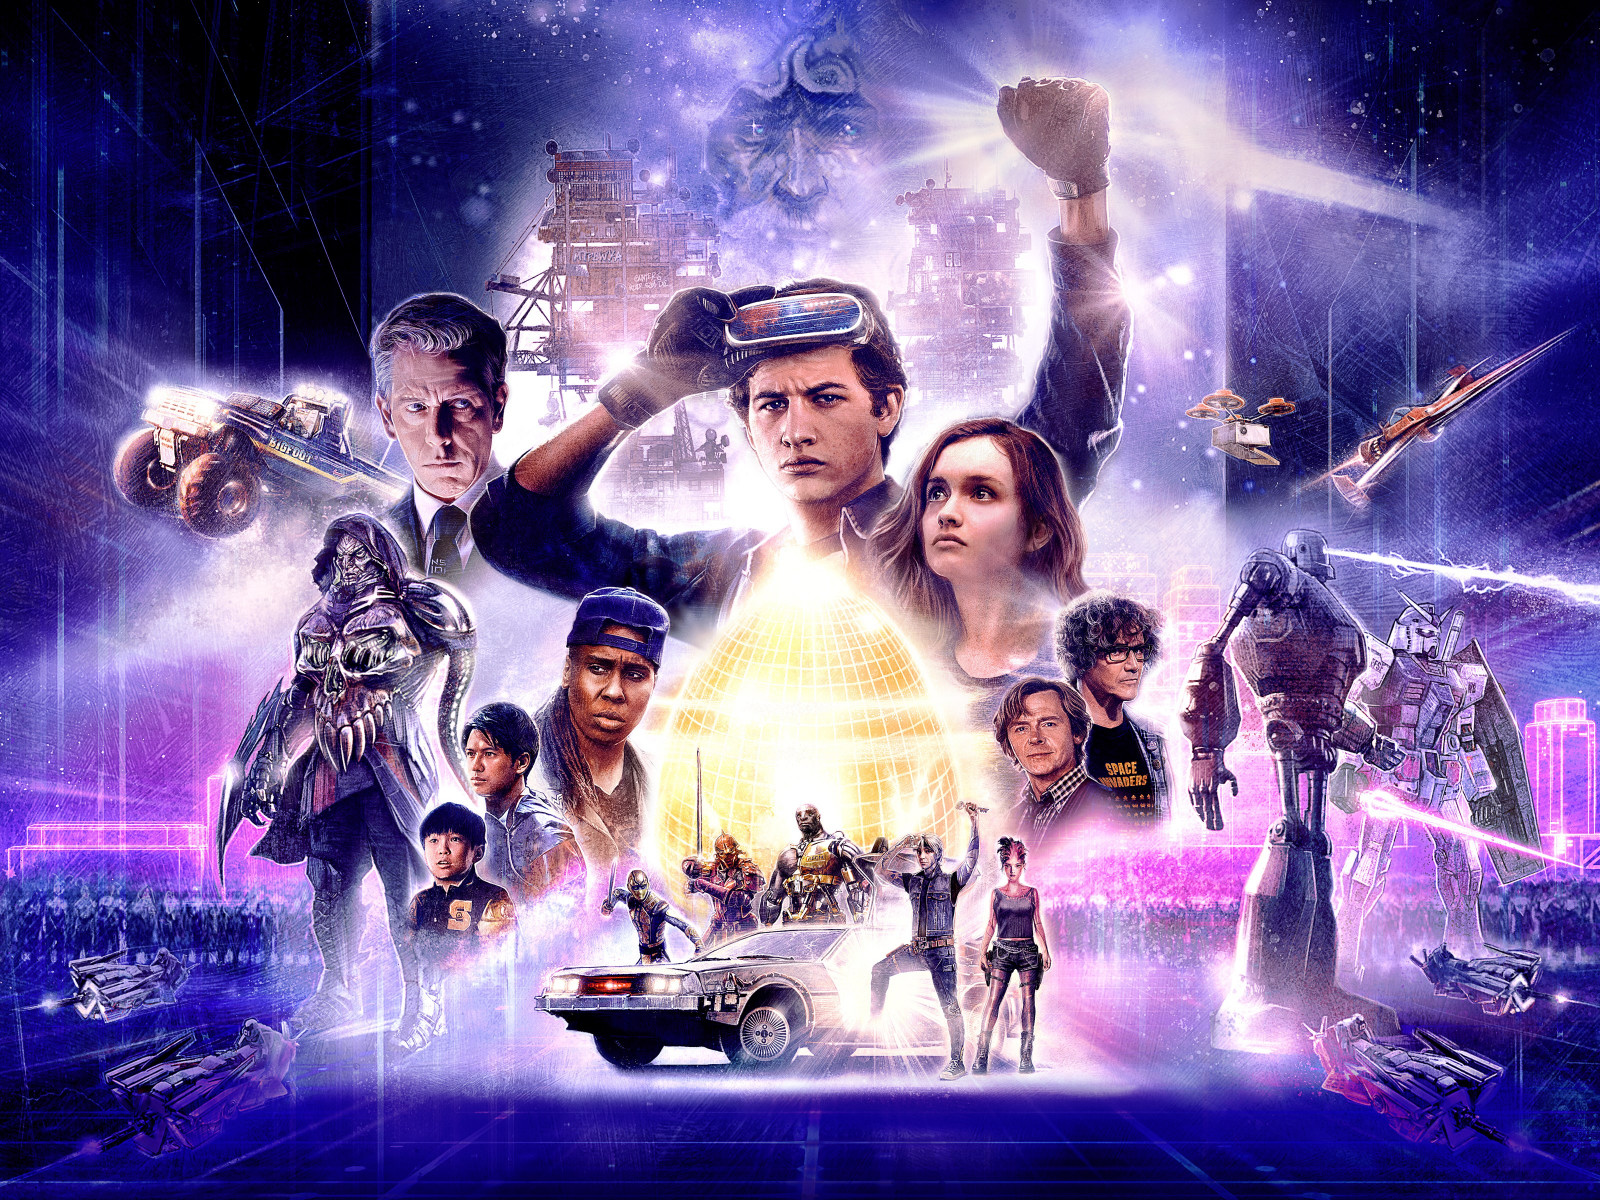 Ready Player One poster wallpaper 1600x1200